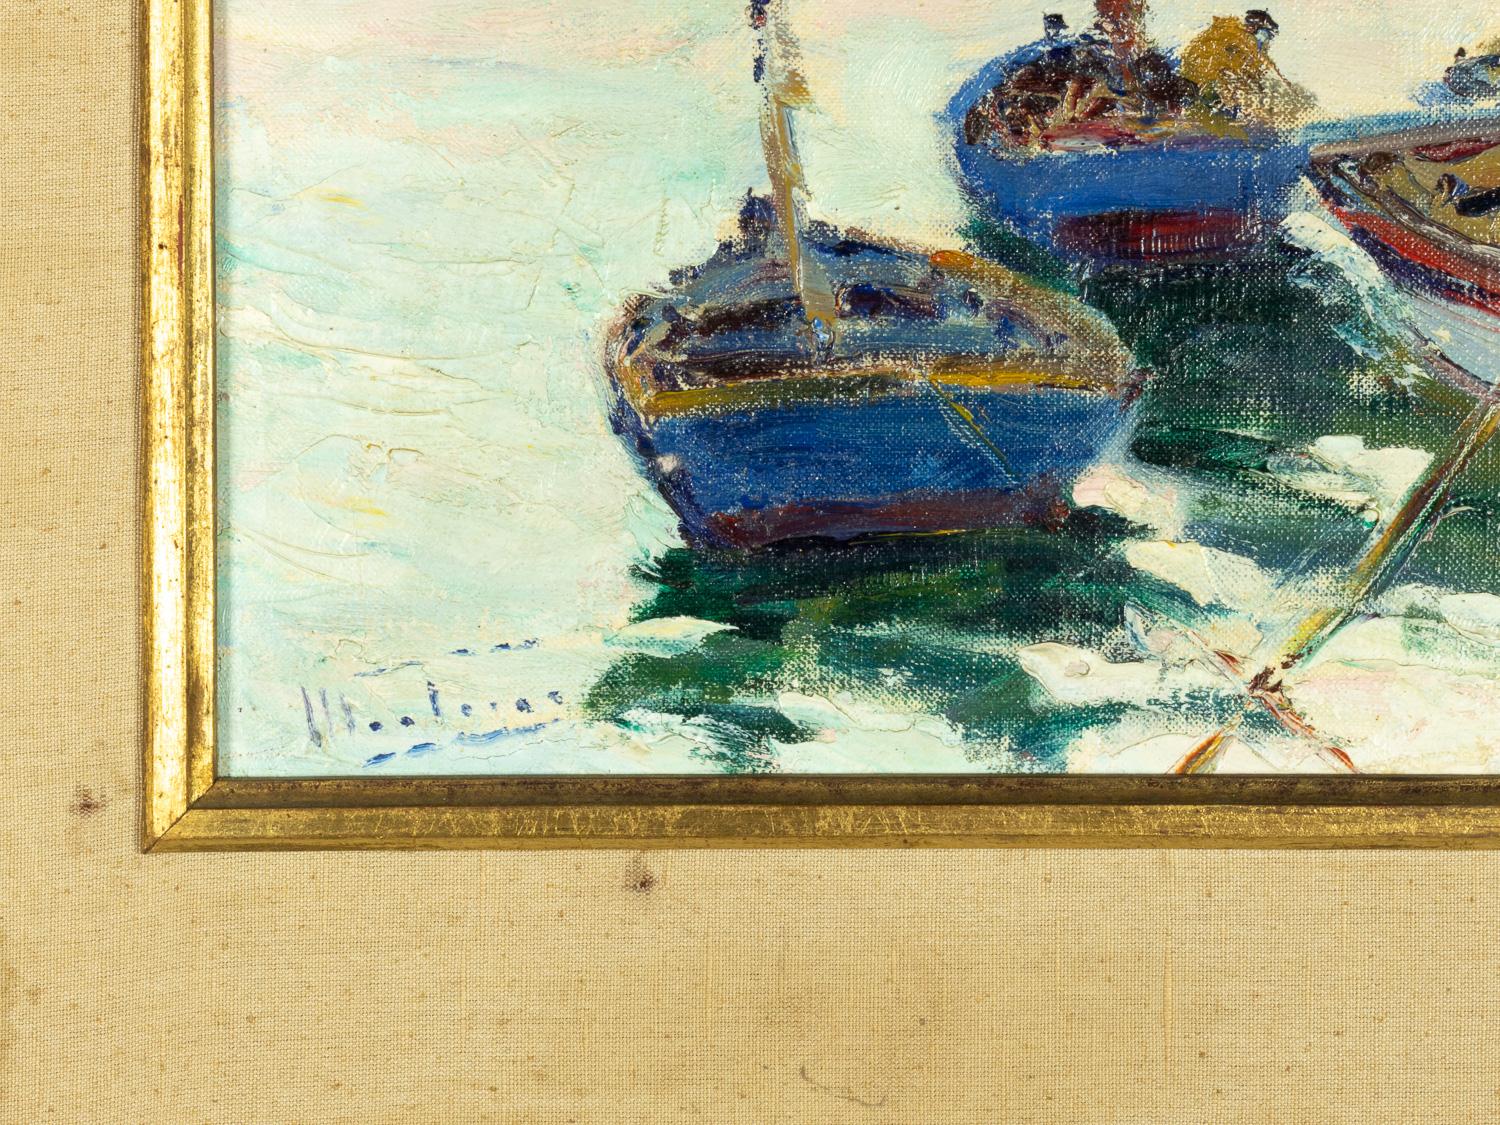 Sea Painting By Jaime Murteira, 20th Century In Good Condition For Sale In Lisbon, PT